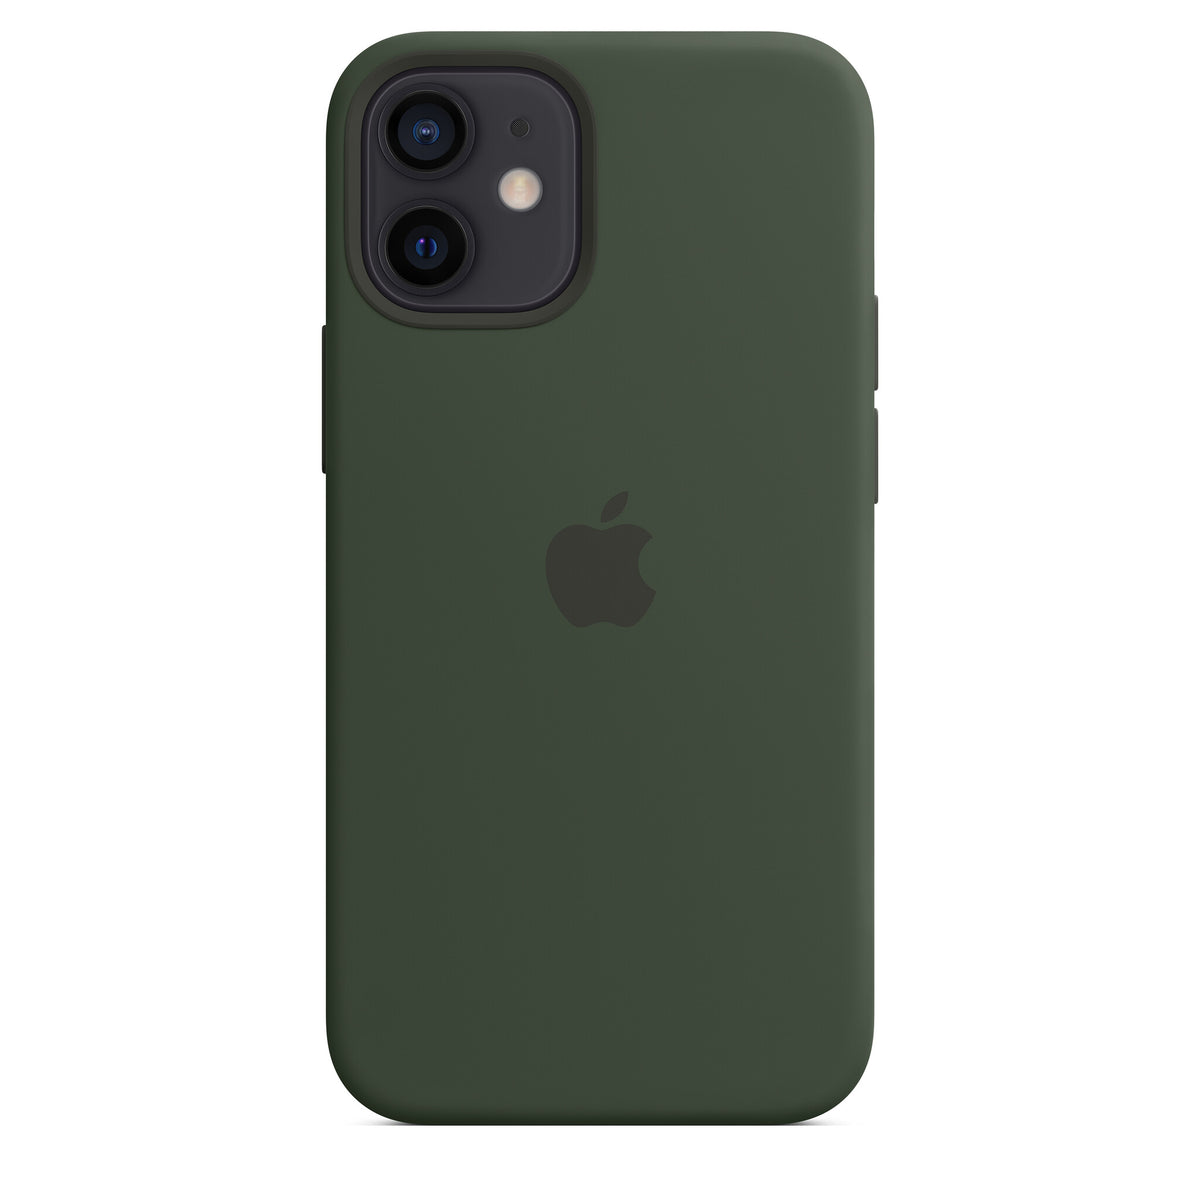 Apple iPhone 12 mini Silicone Case with MagSafe in Cypress Green